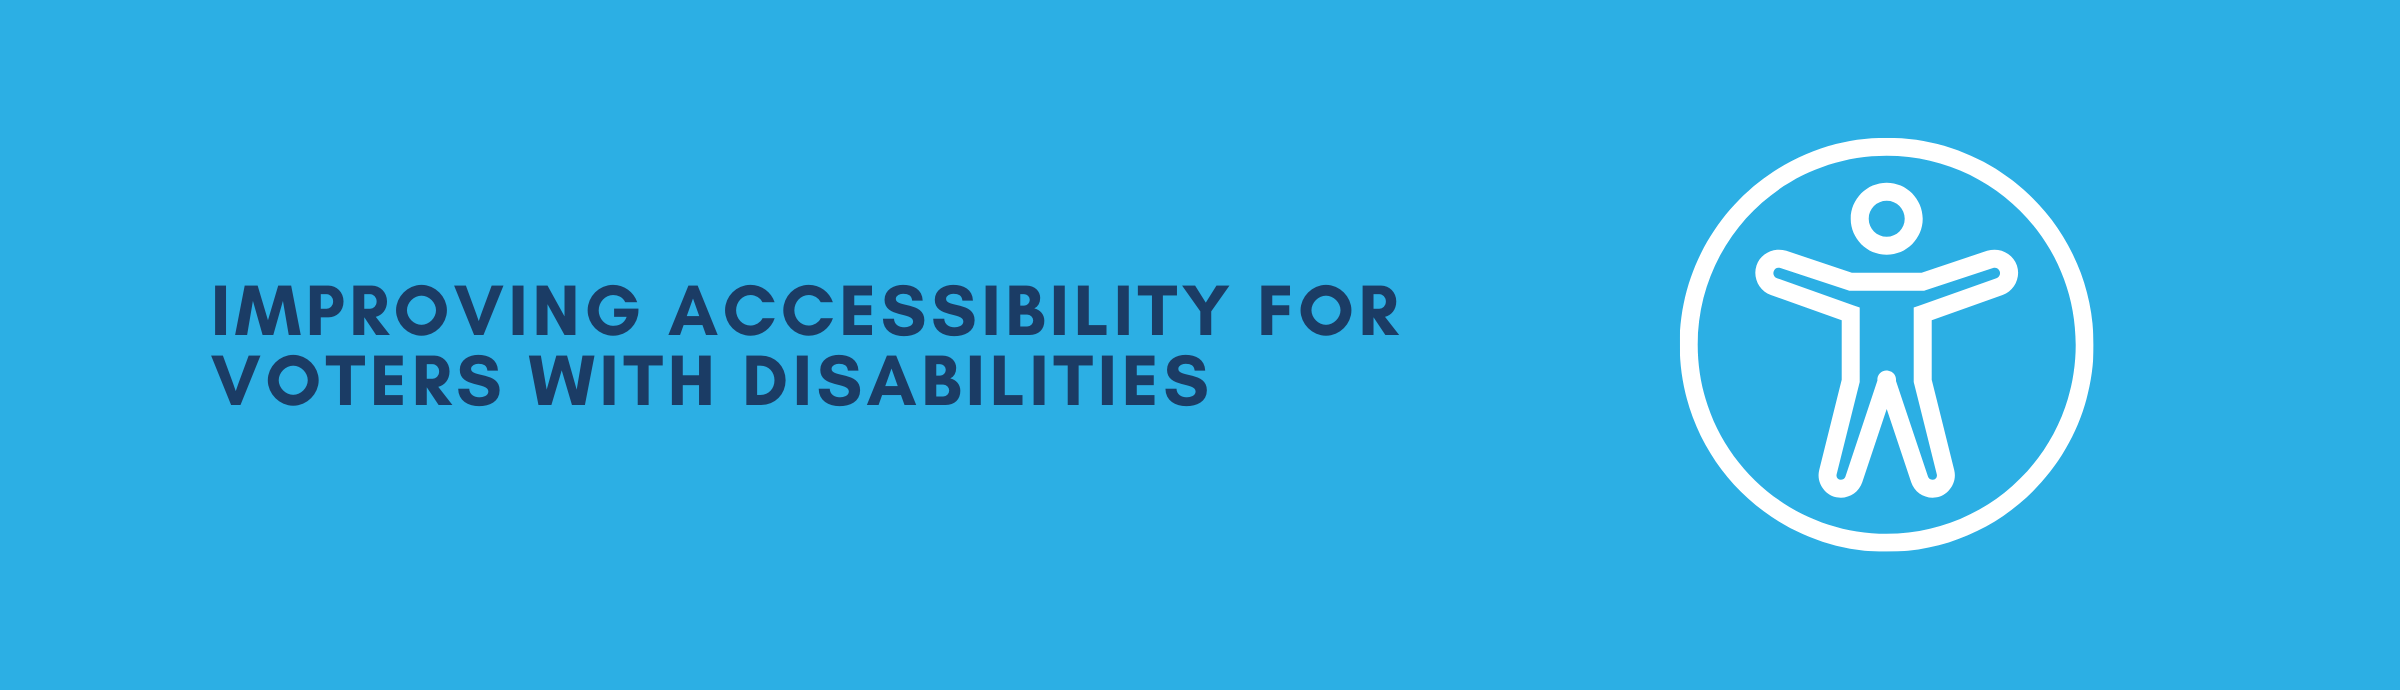 Text to the left reach "Improving Accessibility for Voters with Disabilities." The graphic to the right includes a figure of a human with their arms raised within a circle.